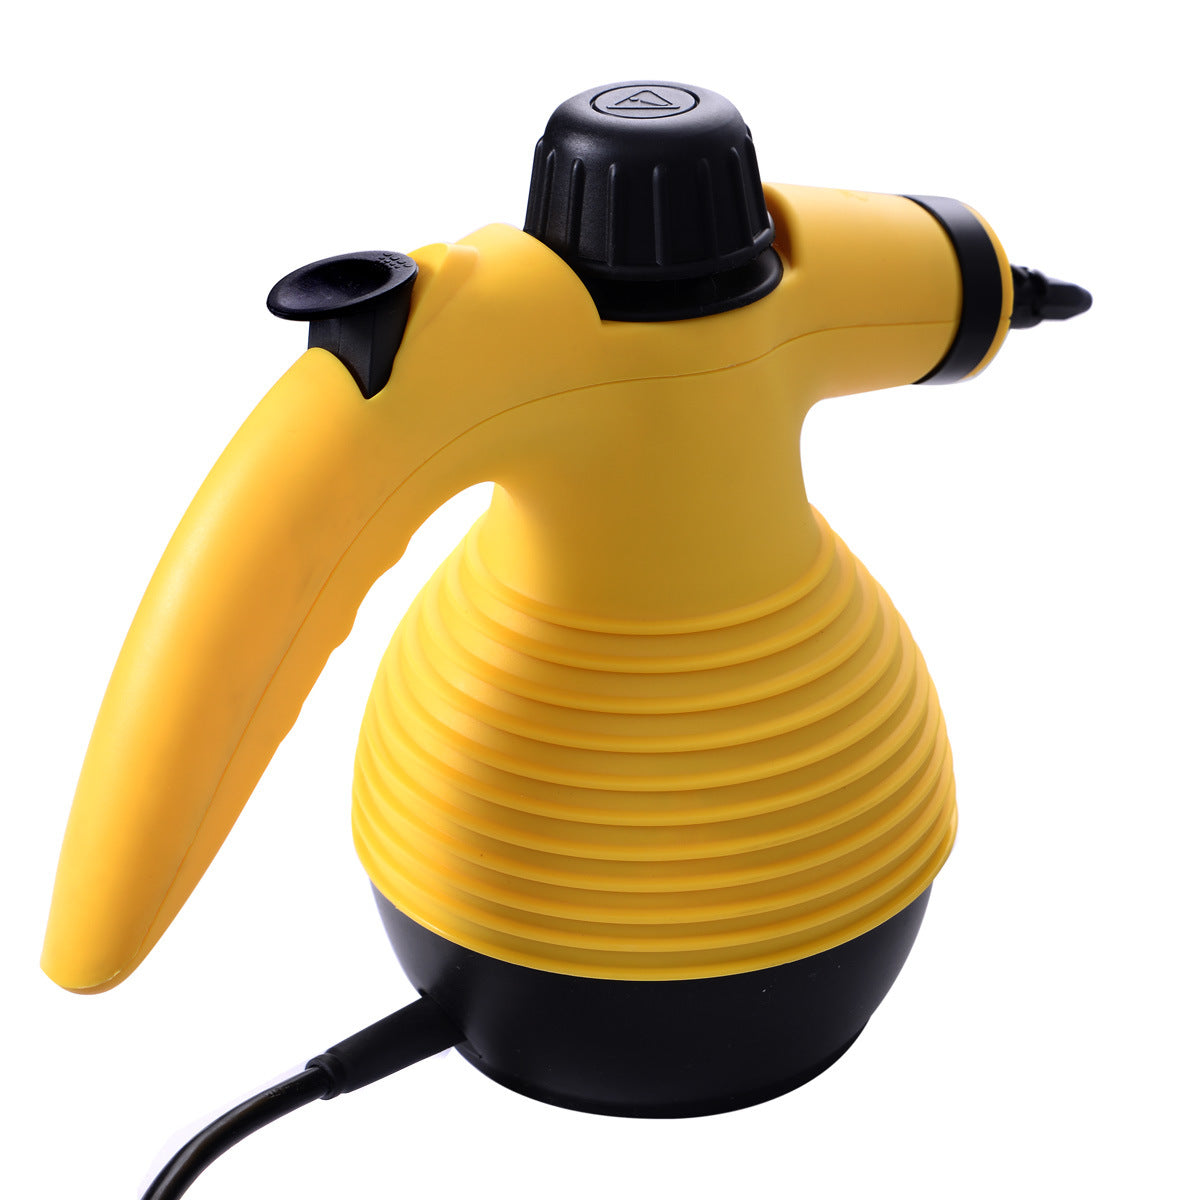 Handheld Pressurized Steam Cleaner with 9-Piece Accessory Set, Multifunctional Steam Cleaning for Car, Home, Bedroom, Chemical-Free, Yellow XH